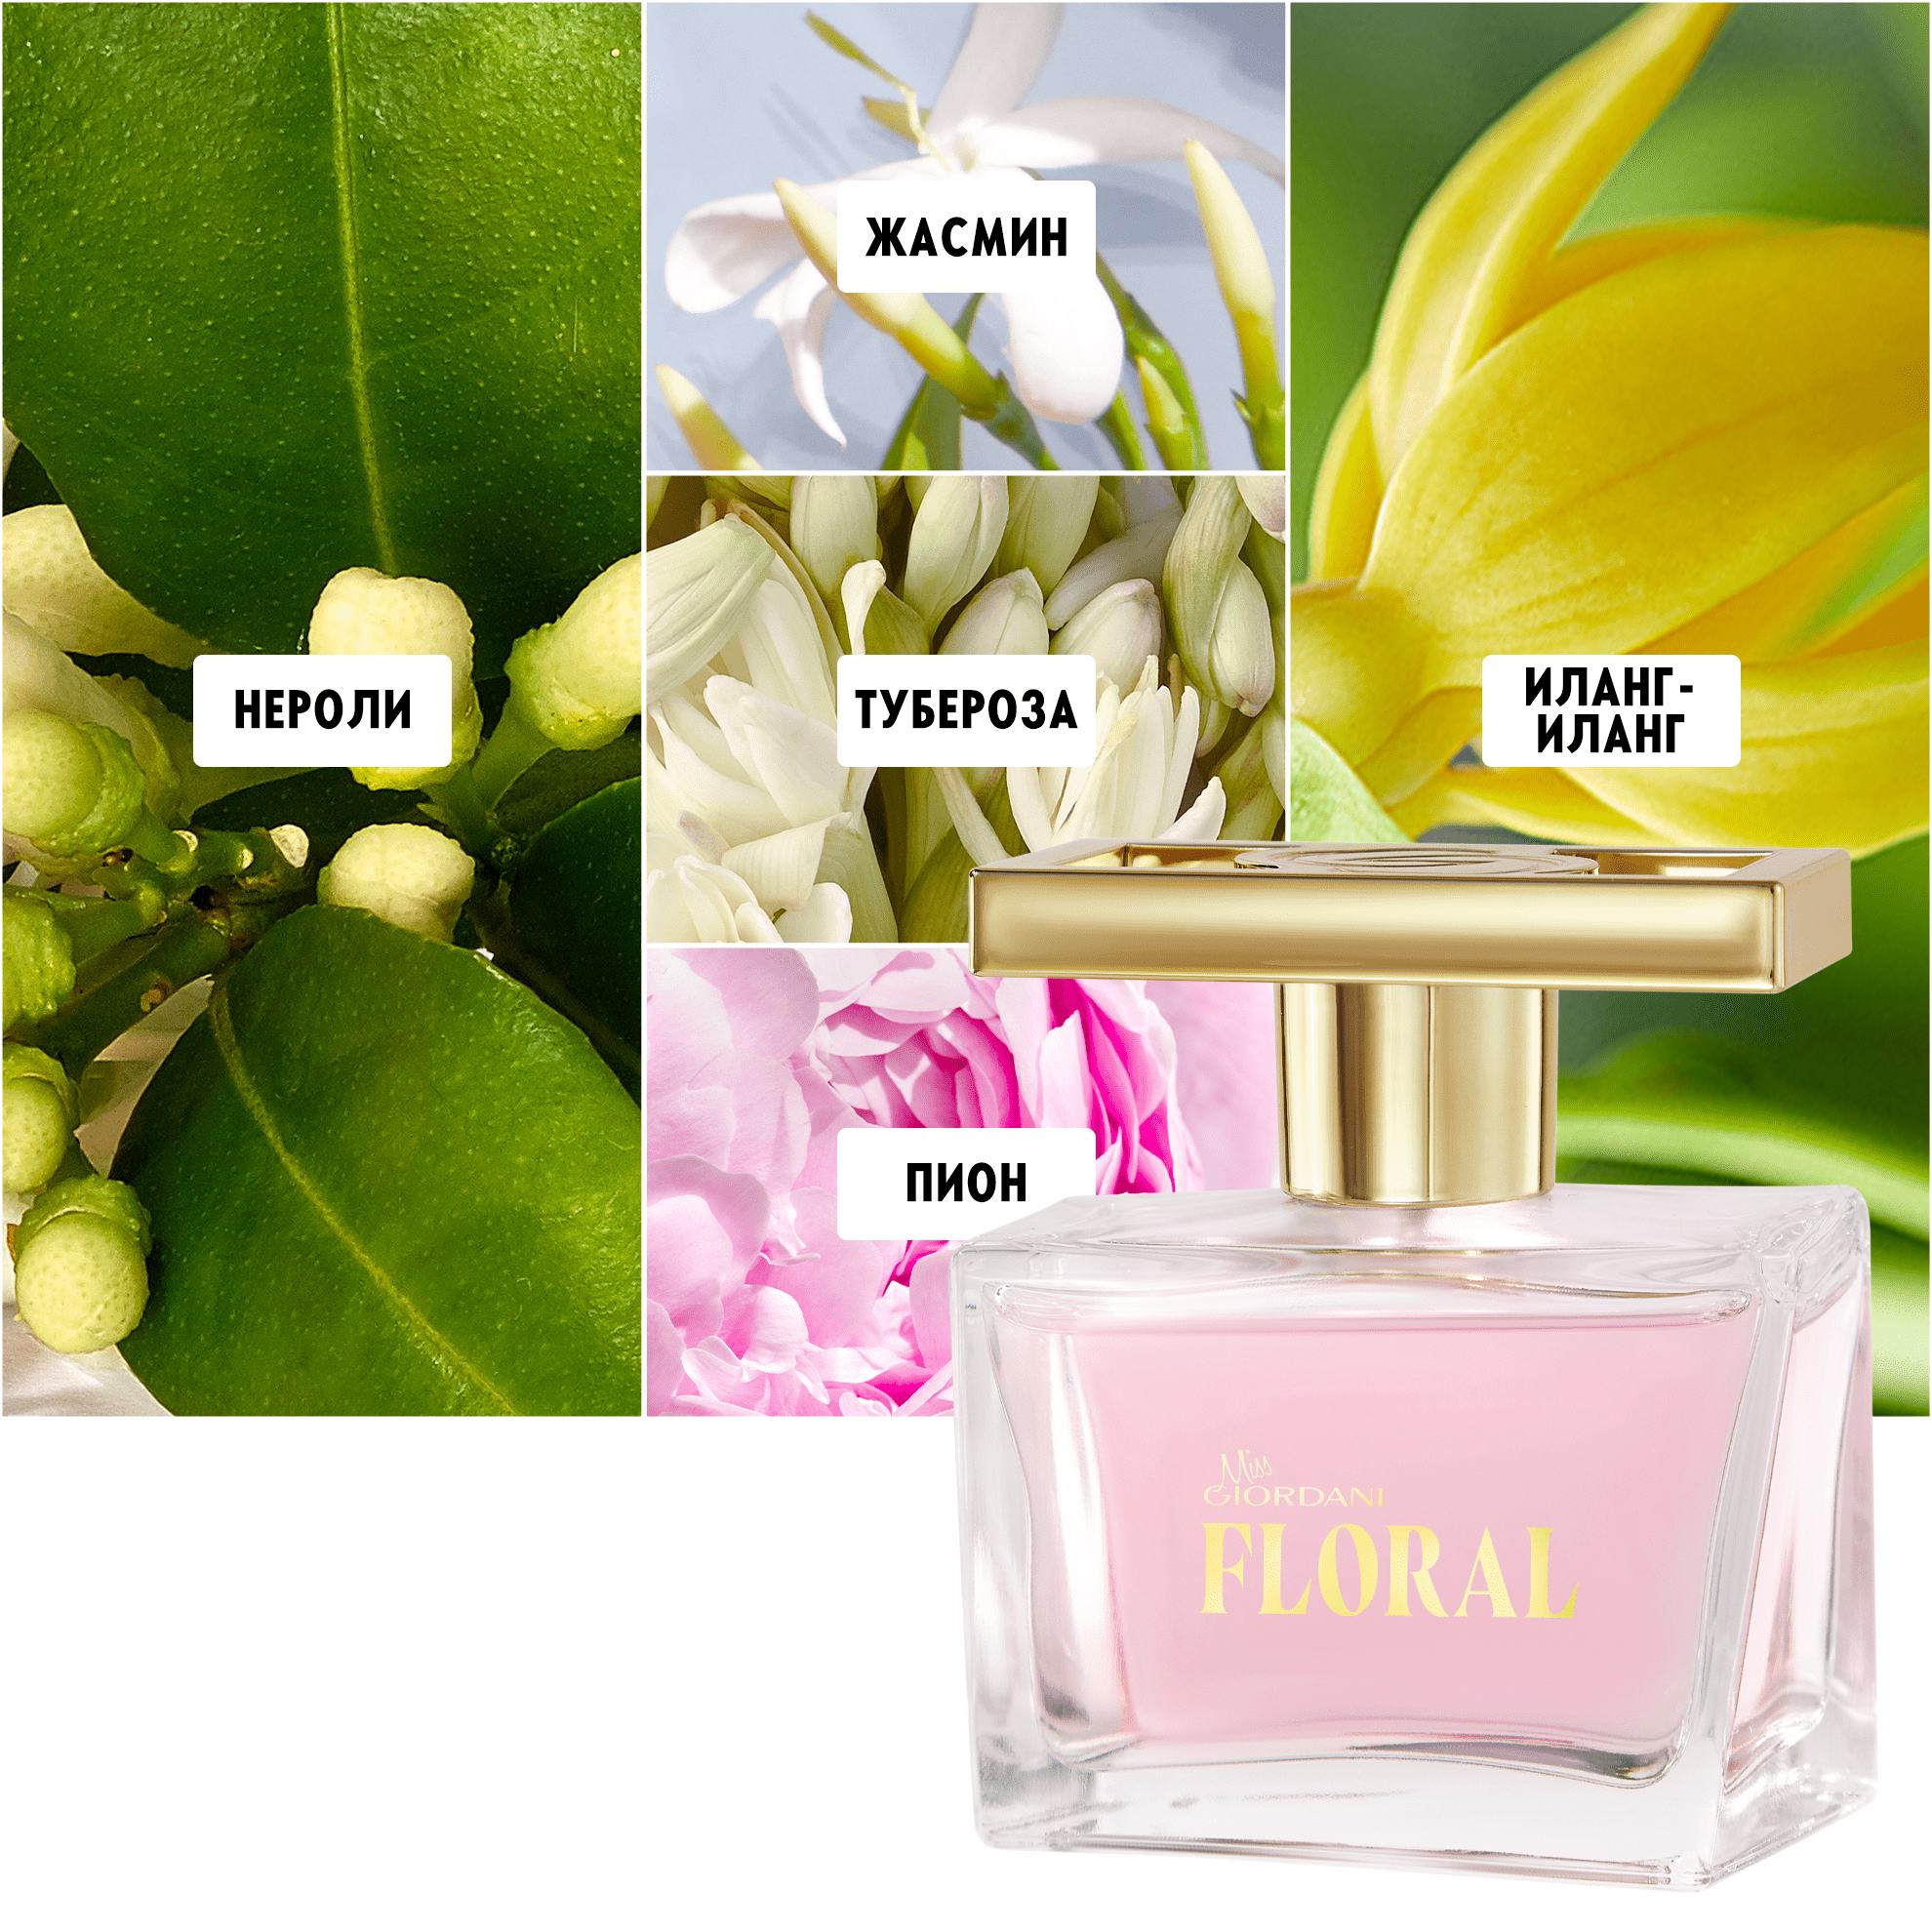 https://media-cdn.oriflame.com/productImage?externalMediaId=product-management-media%2fProducts%2f46718%2fBY%2f46718_6.png&id=19003796&version=3